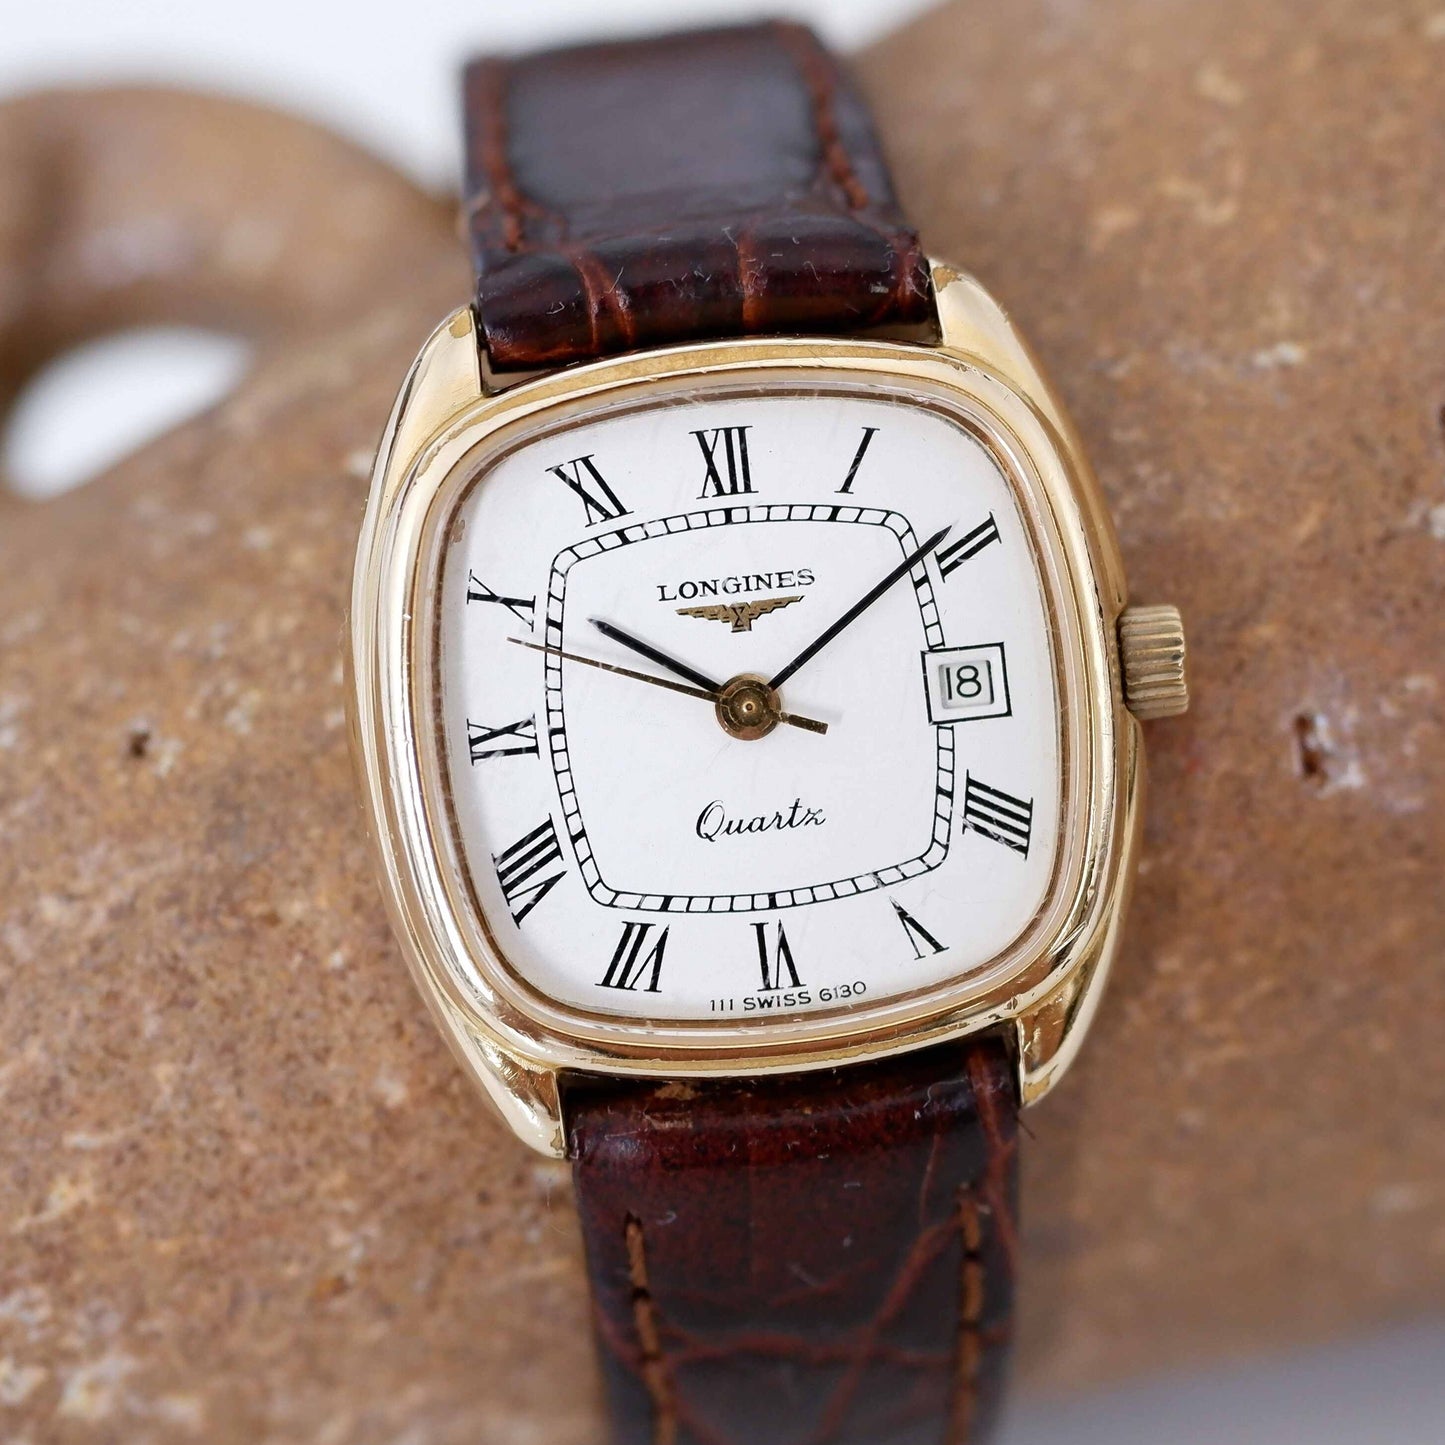 Longines Vintage Ladies Watch: 80s Golden, Rectangular with Roman Numerals | Second Front Side